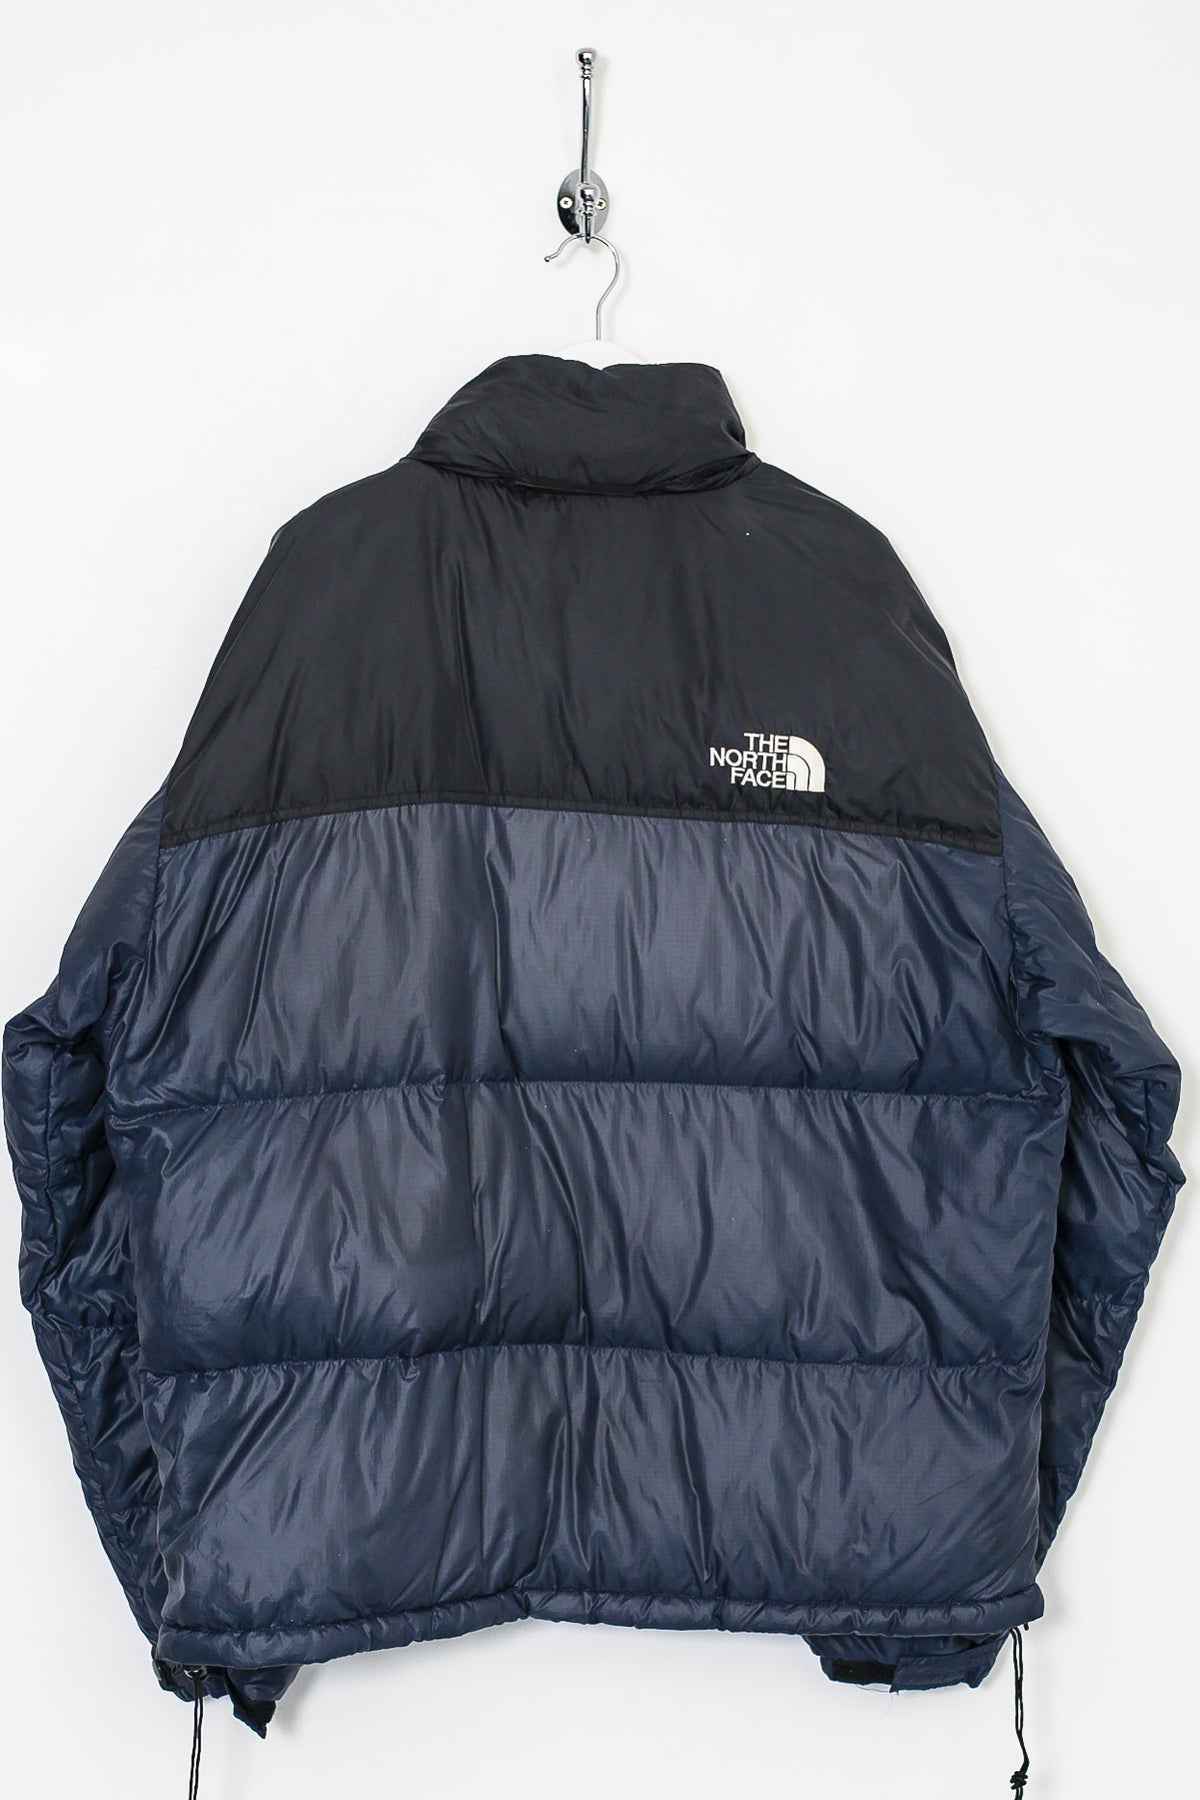 The North Face 700 Fill Nuptse Puffer Jacket (XL)